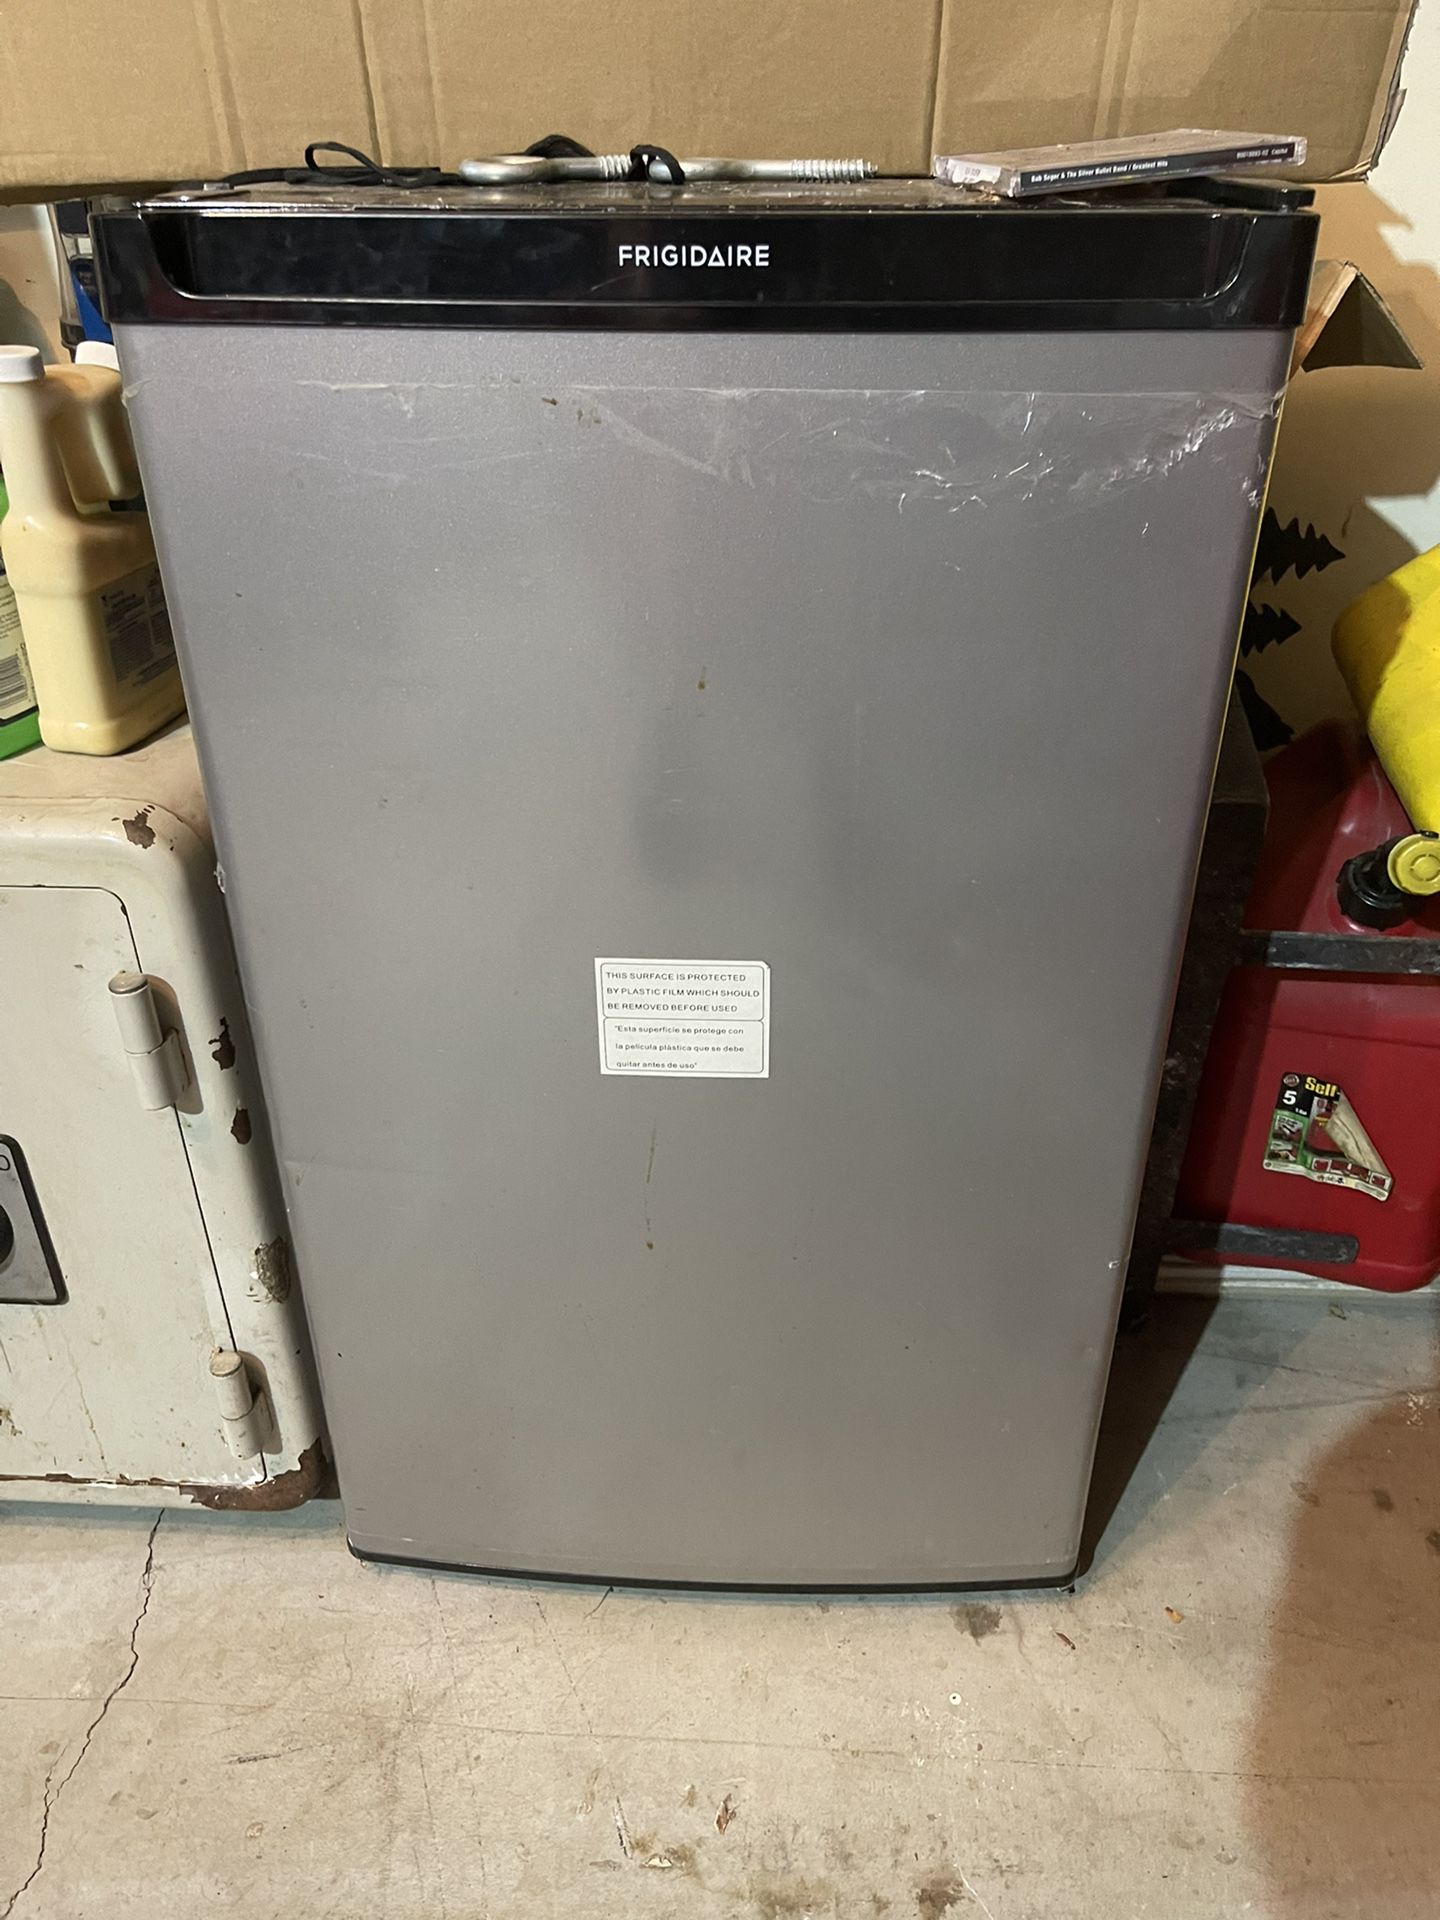 Small refrigerator for an apartment or dorm